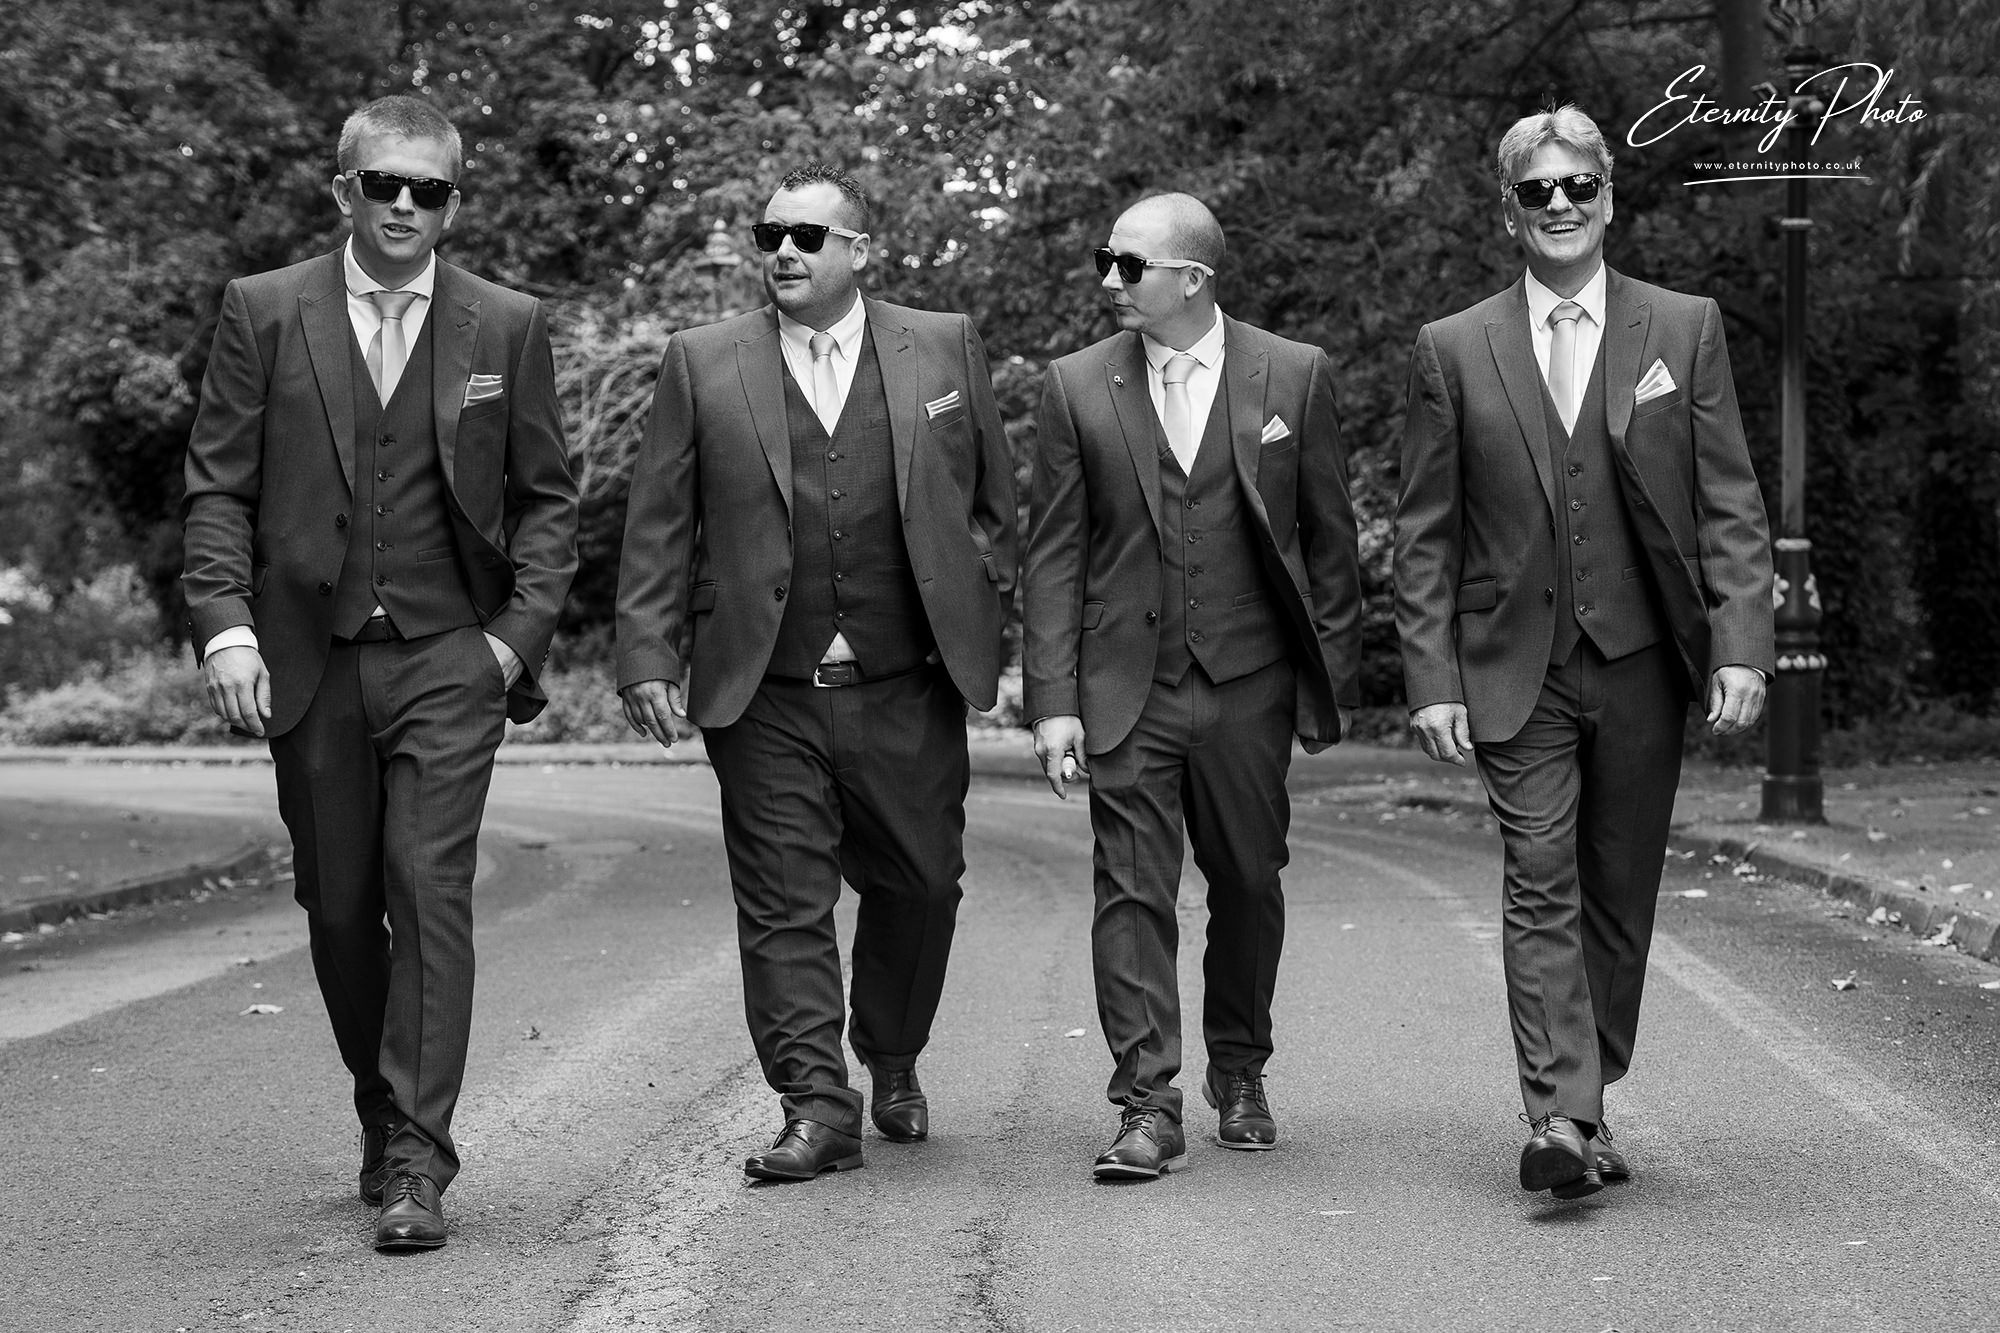 Four men in suits walking confidently on road.